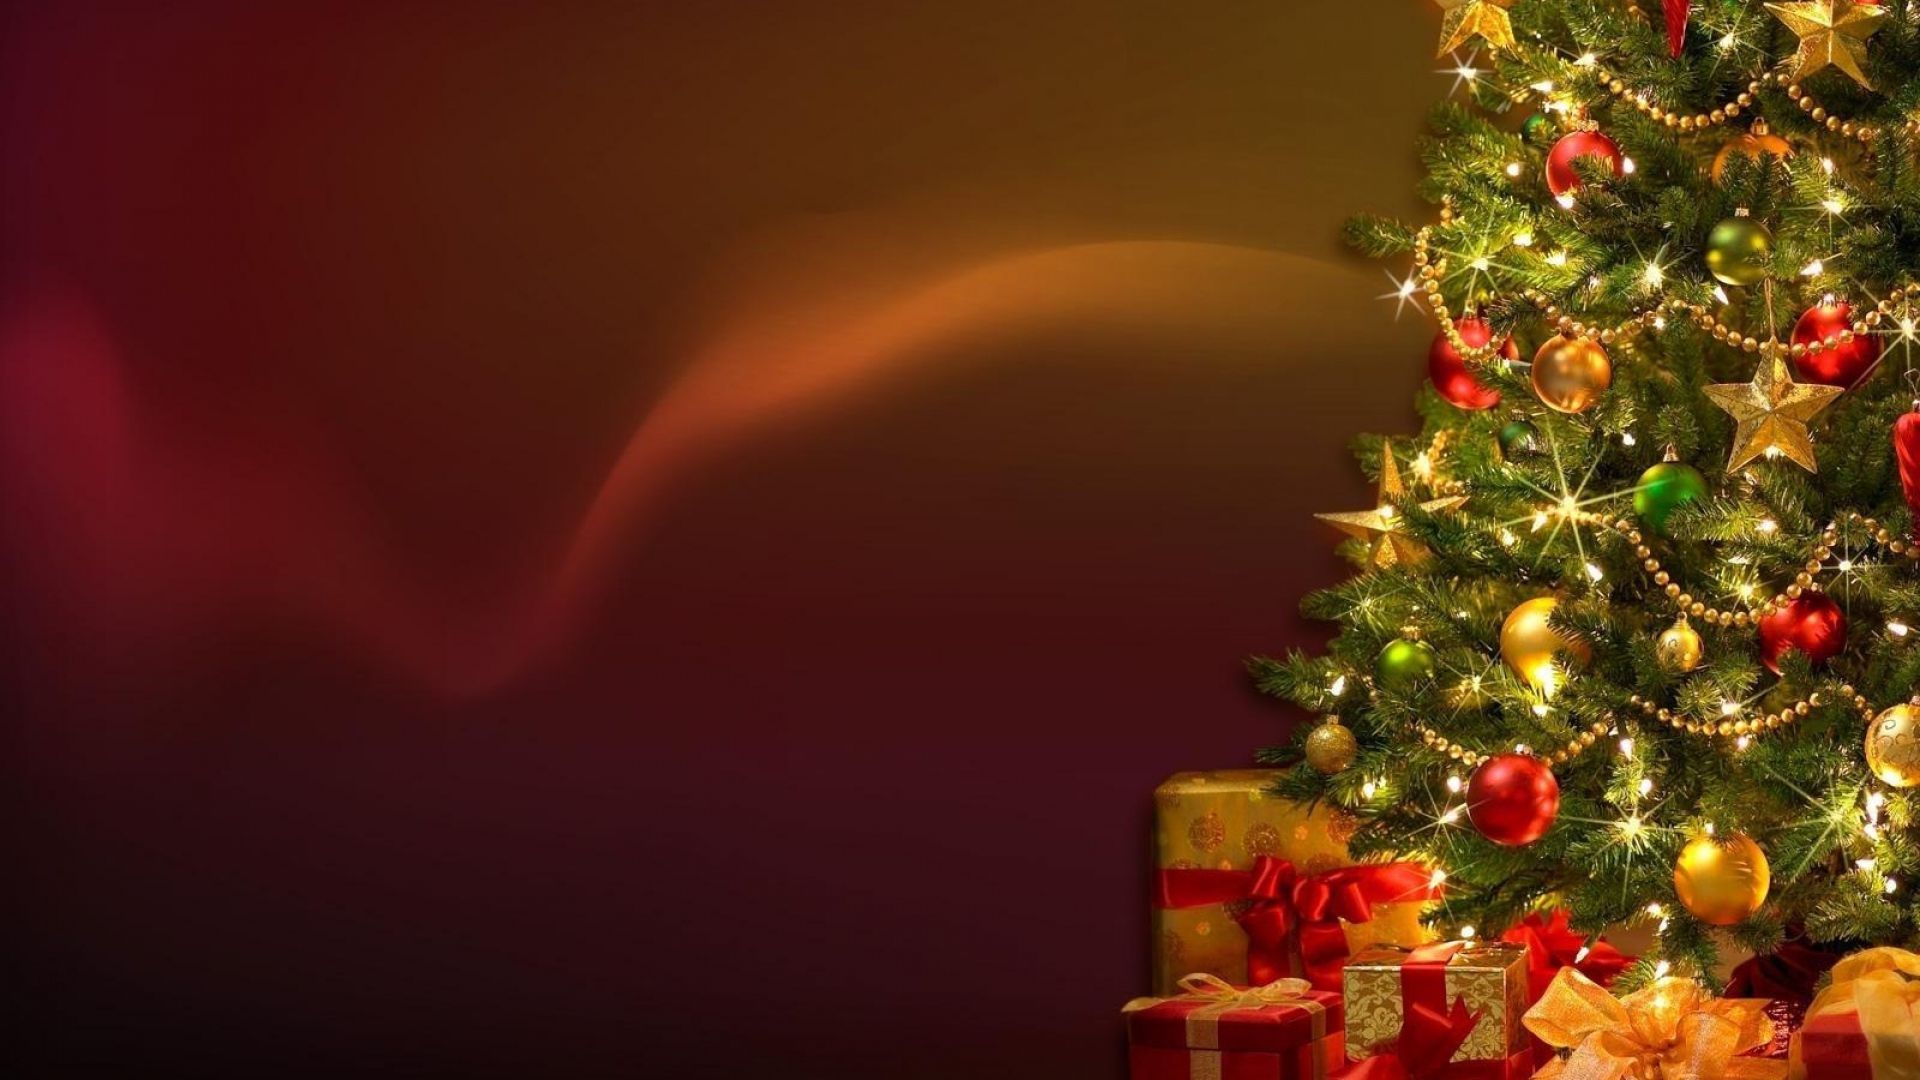 Download Wallpaper 1920x1080 christmas tree, garland, gifts, decorations, holiday, new yea Full HD 1080p HD Background